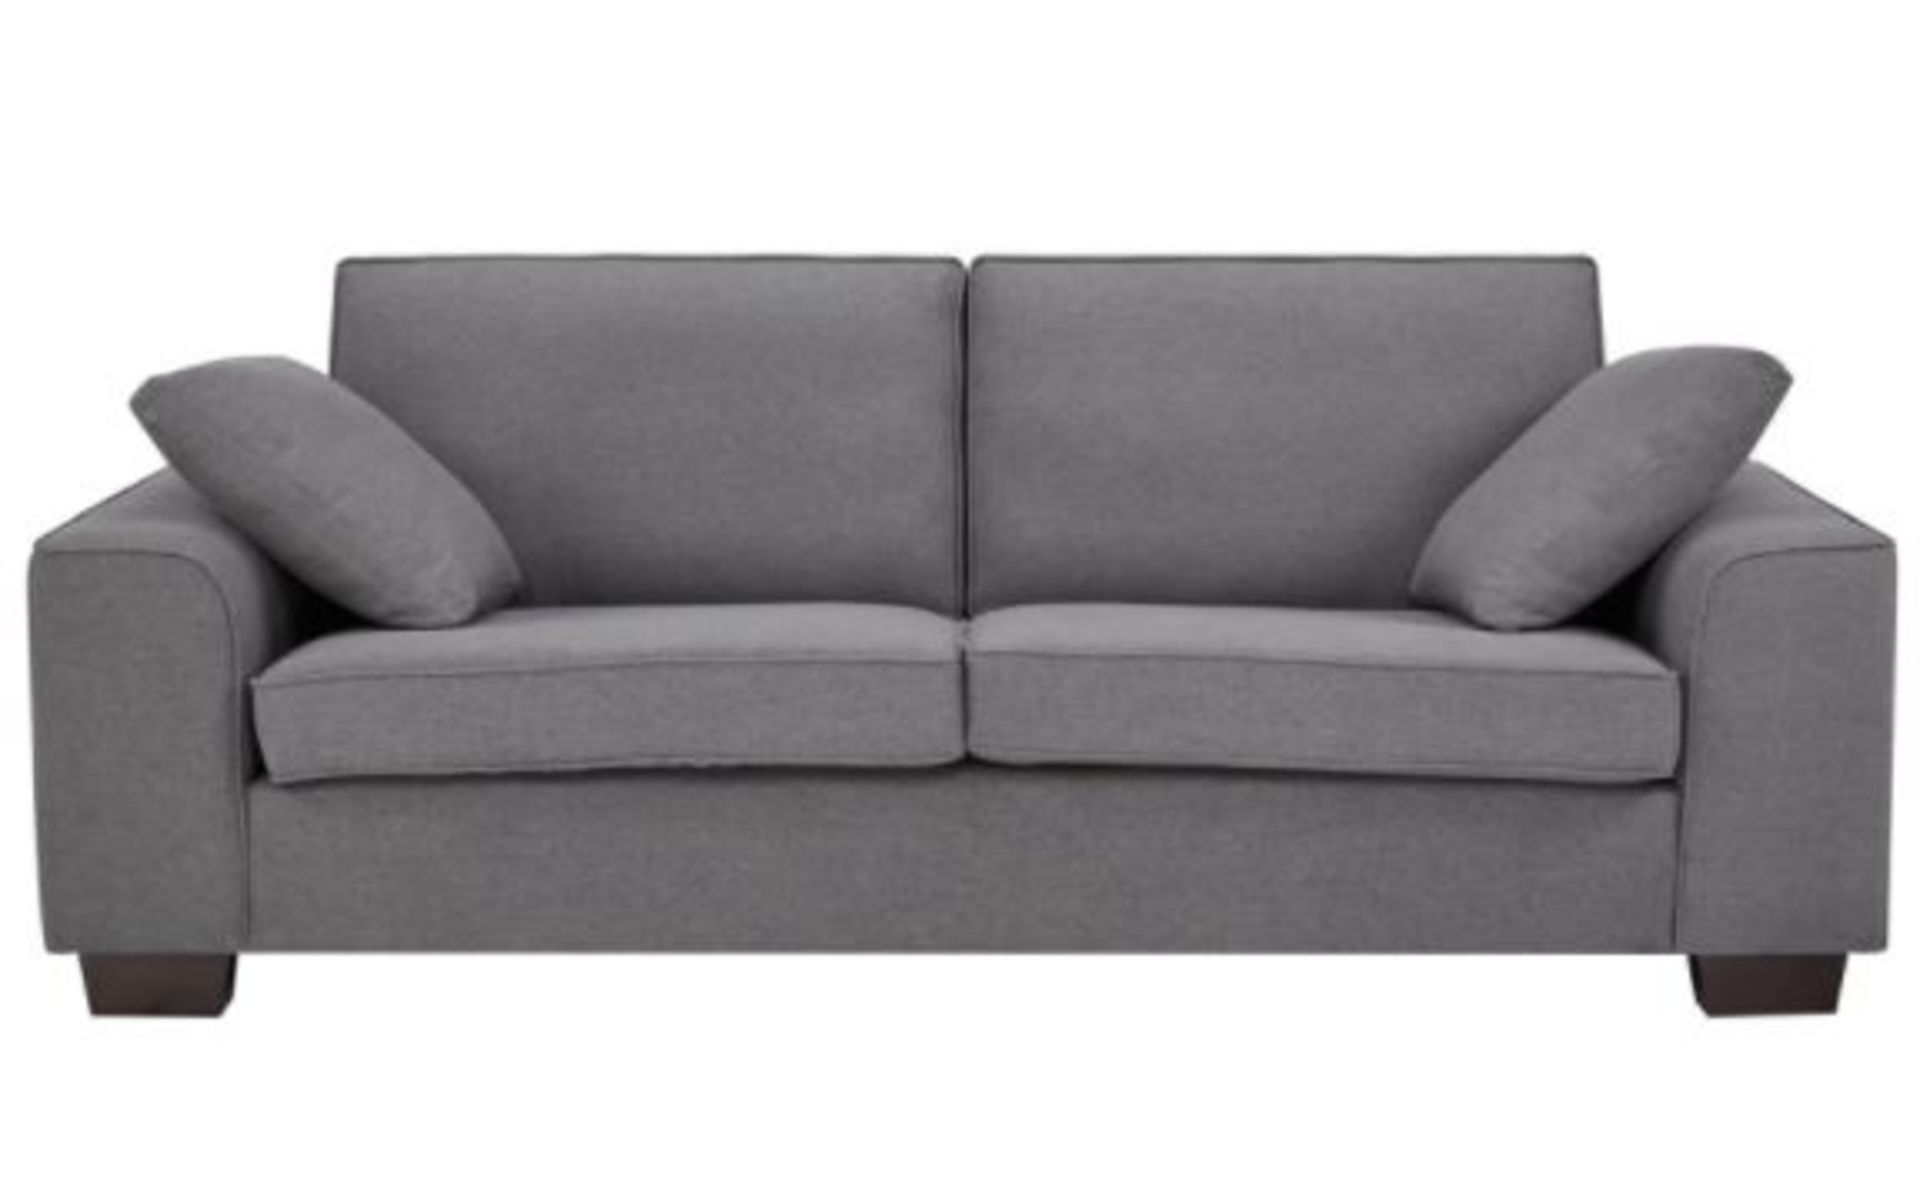 1 X Lola Sofa Charcoal. Wooden Frame With Solid Beechwood Legs. 100% Polyester Fabric Cover (H80xW2 - Image 3 of 6